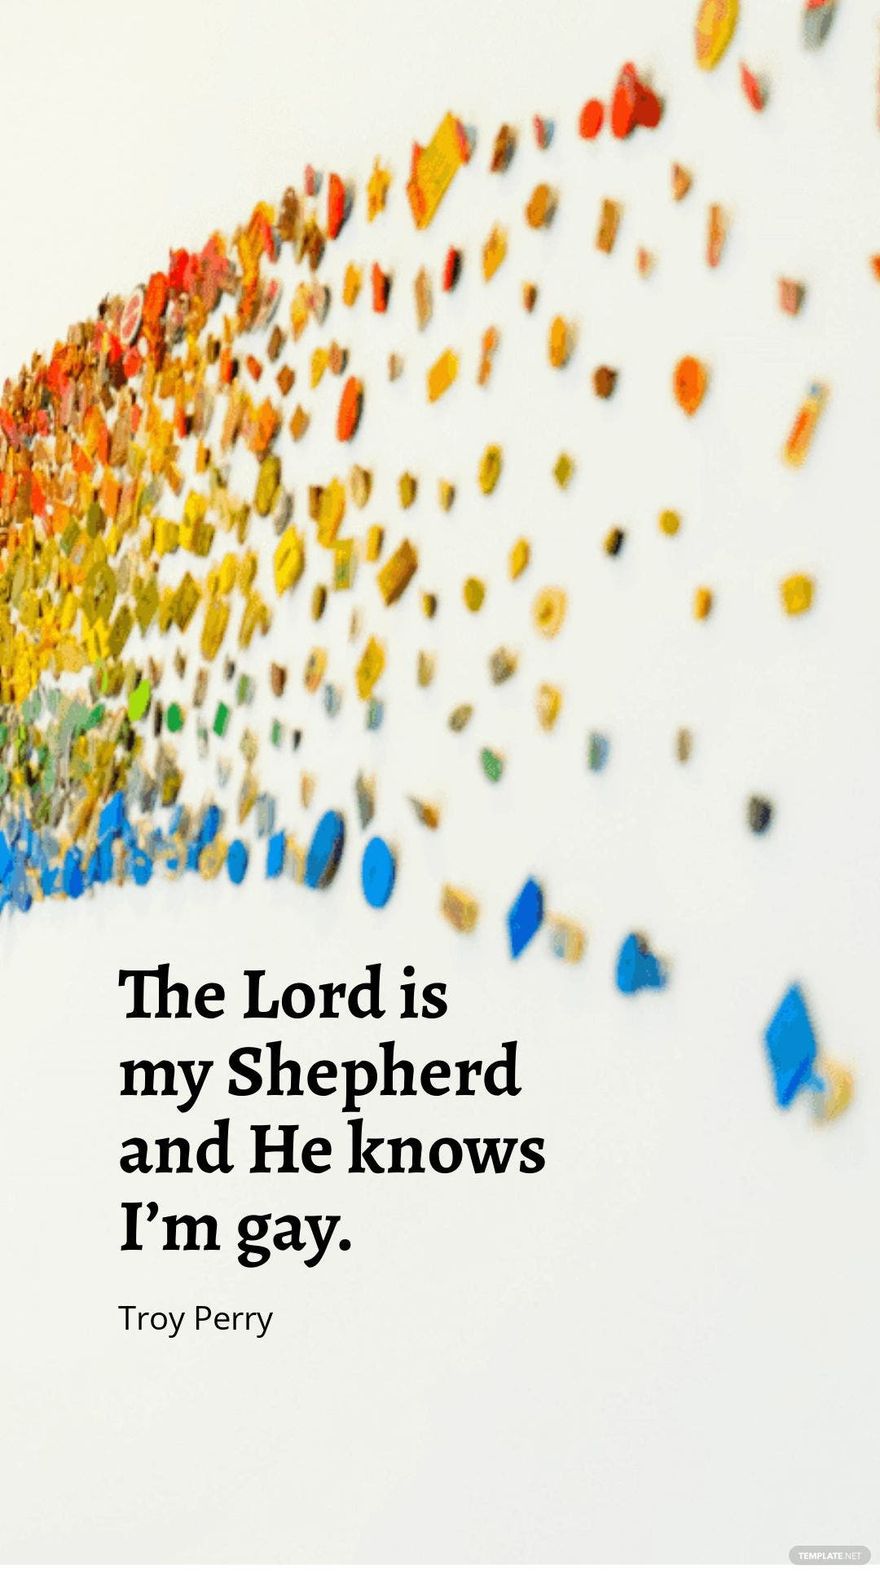 Troy Perry - The Lord is my Shepherd and He knows I’m gay.